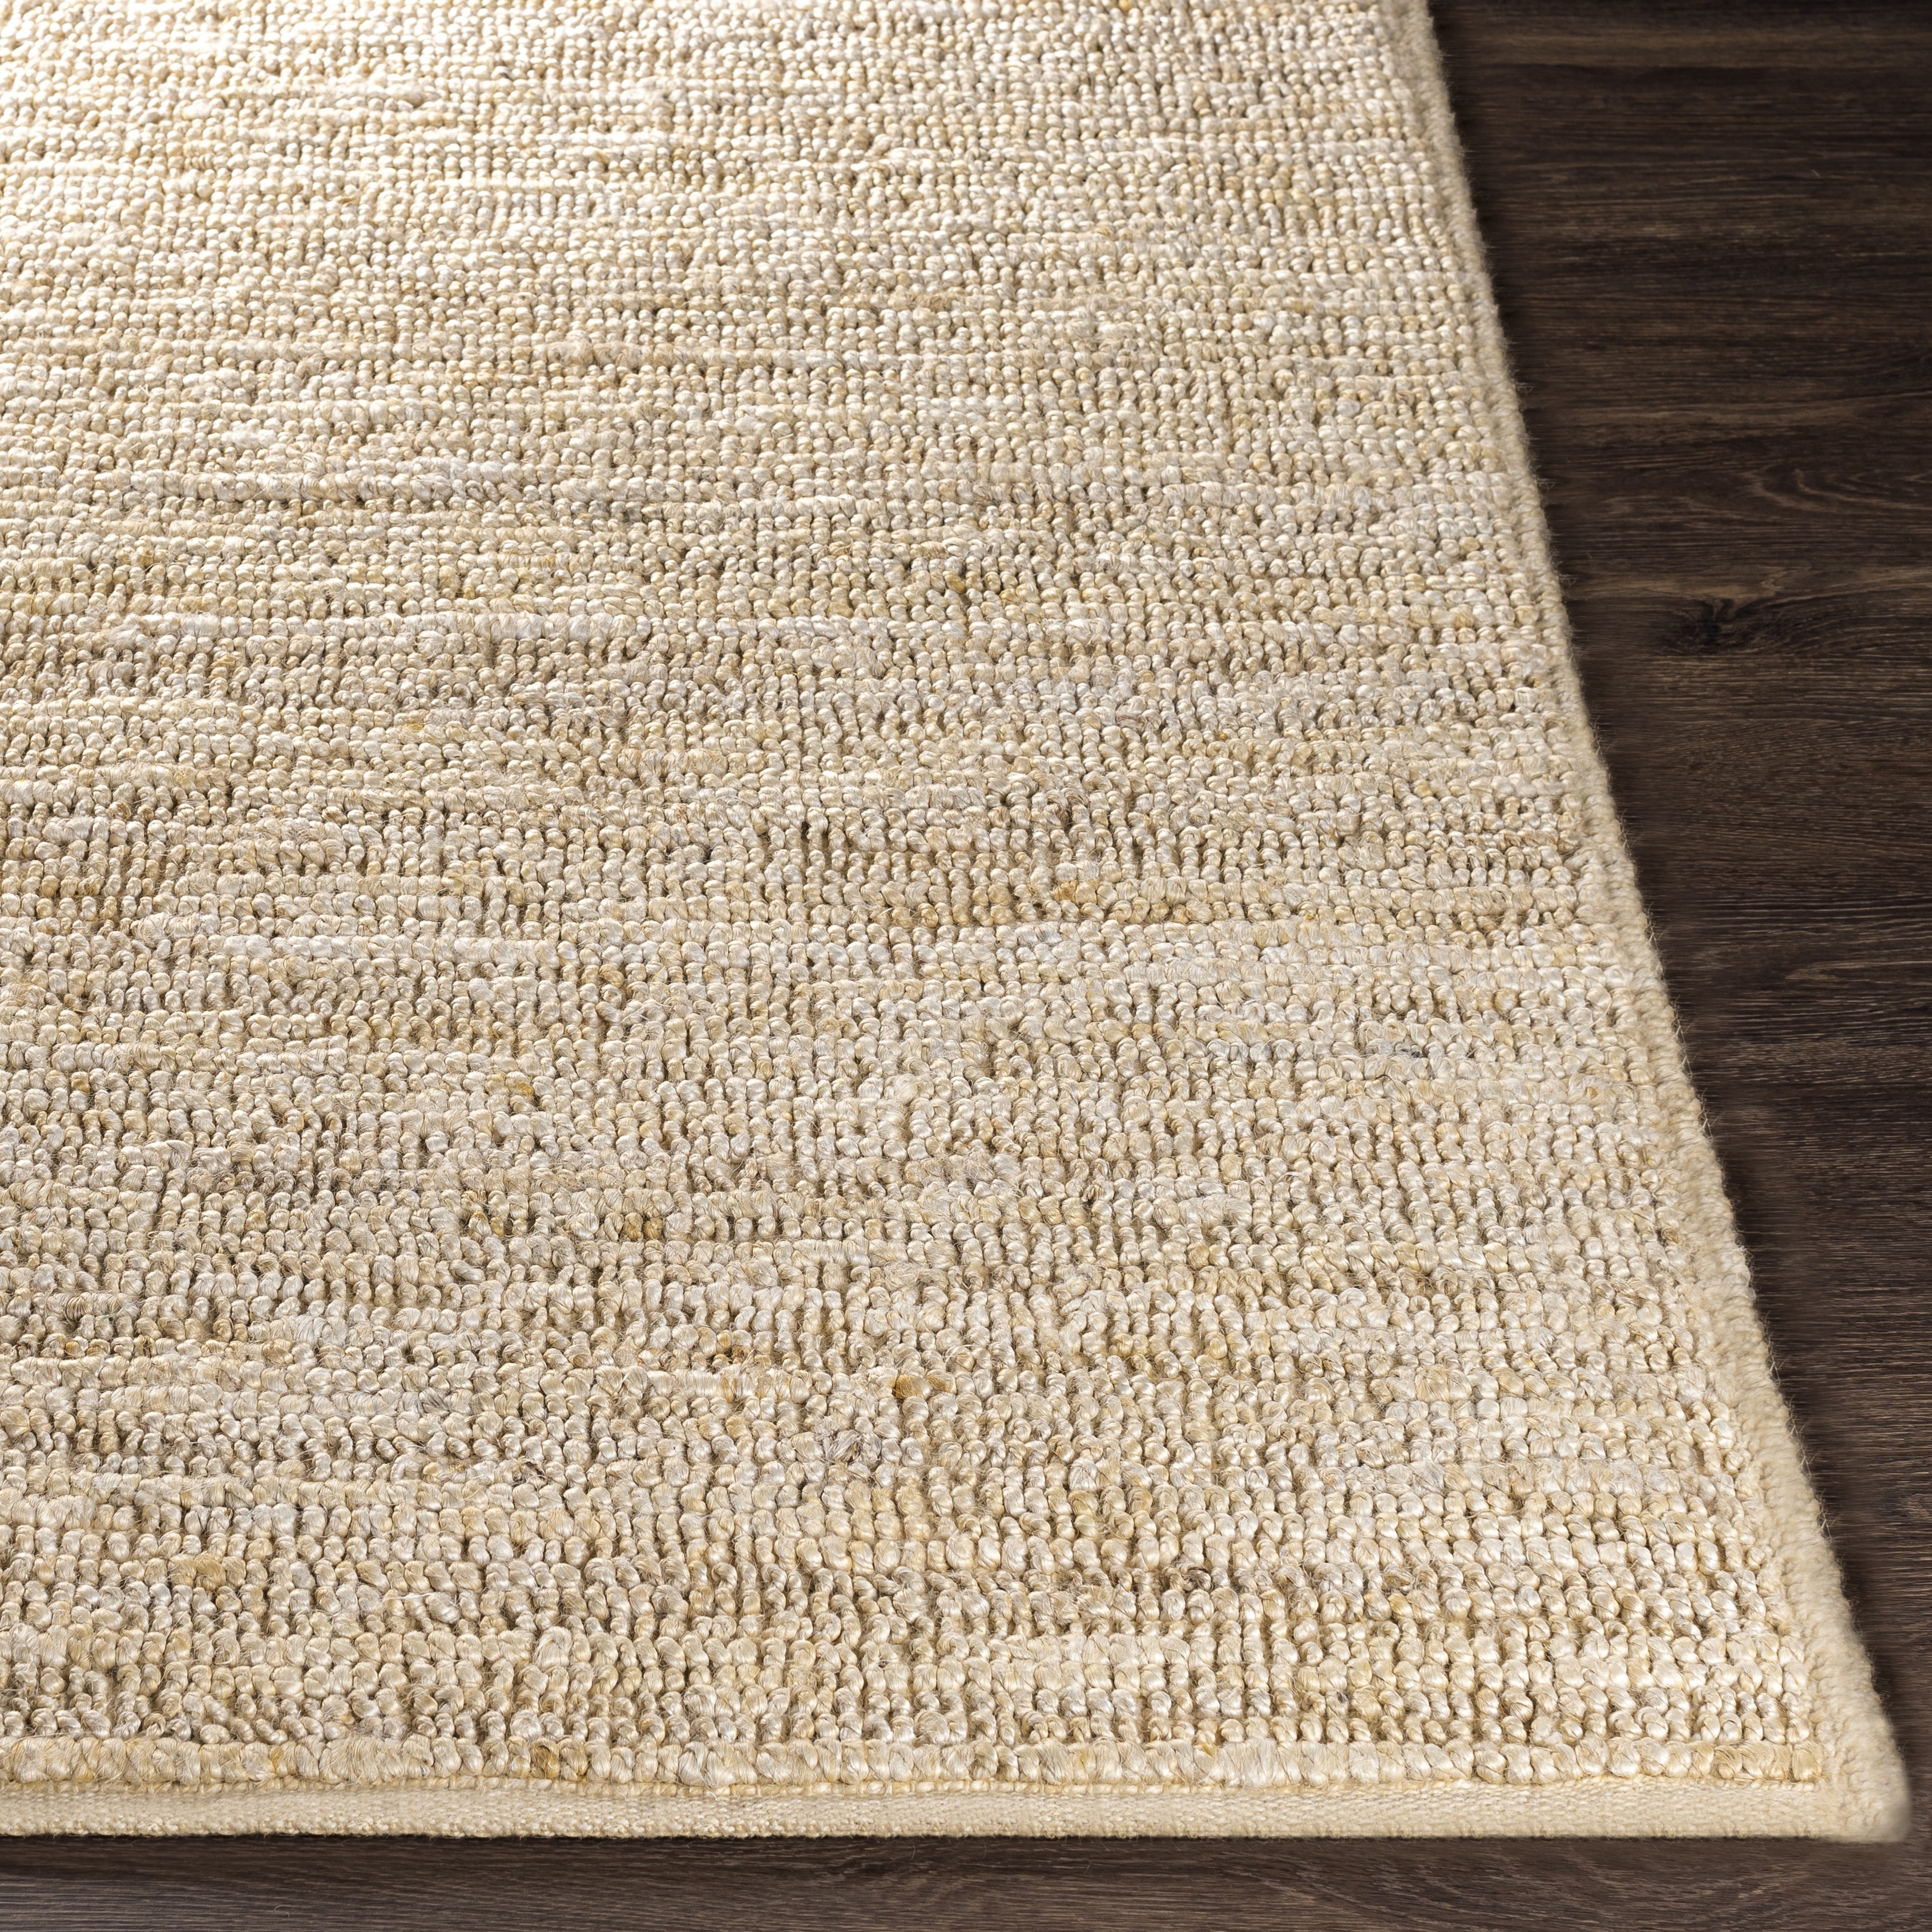 Continental Rug, 5' x 8' - Image 2